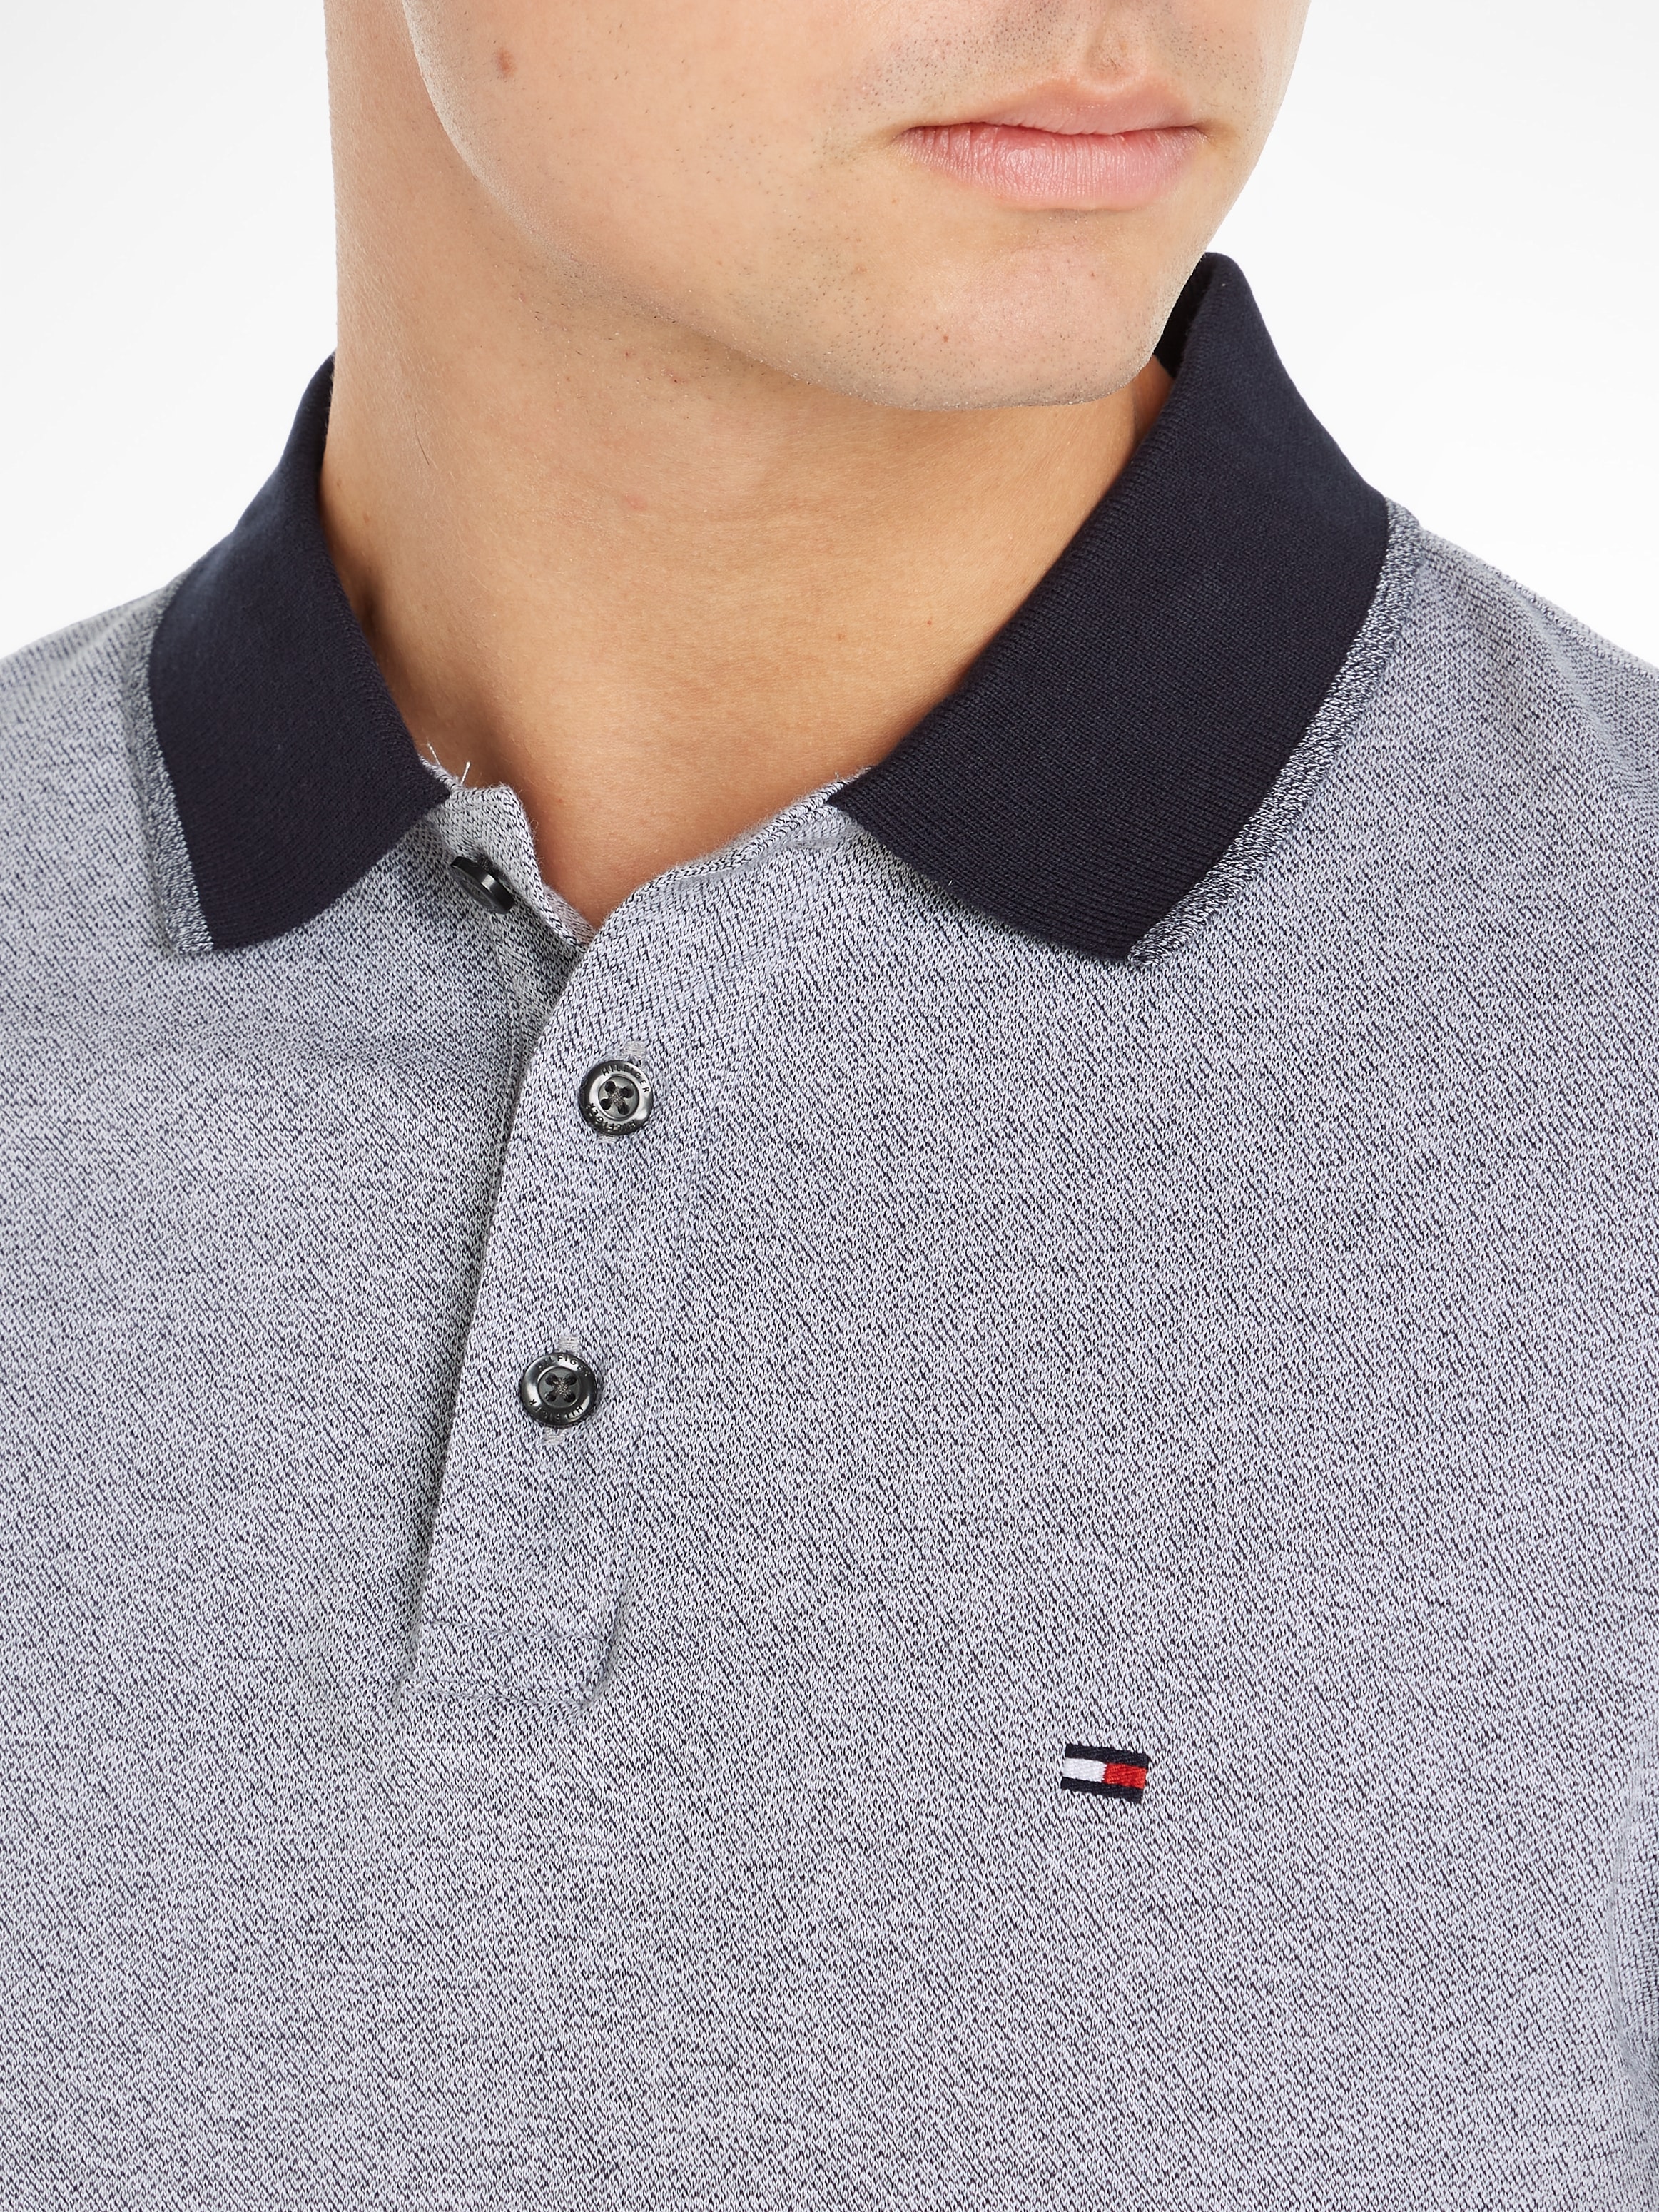 Tommy Hilfiger TIPPED online bei POLO« kaufen »MOULINE SLIM Poloshirt OTTO